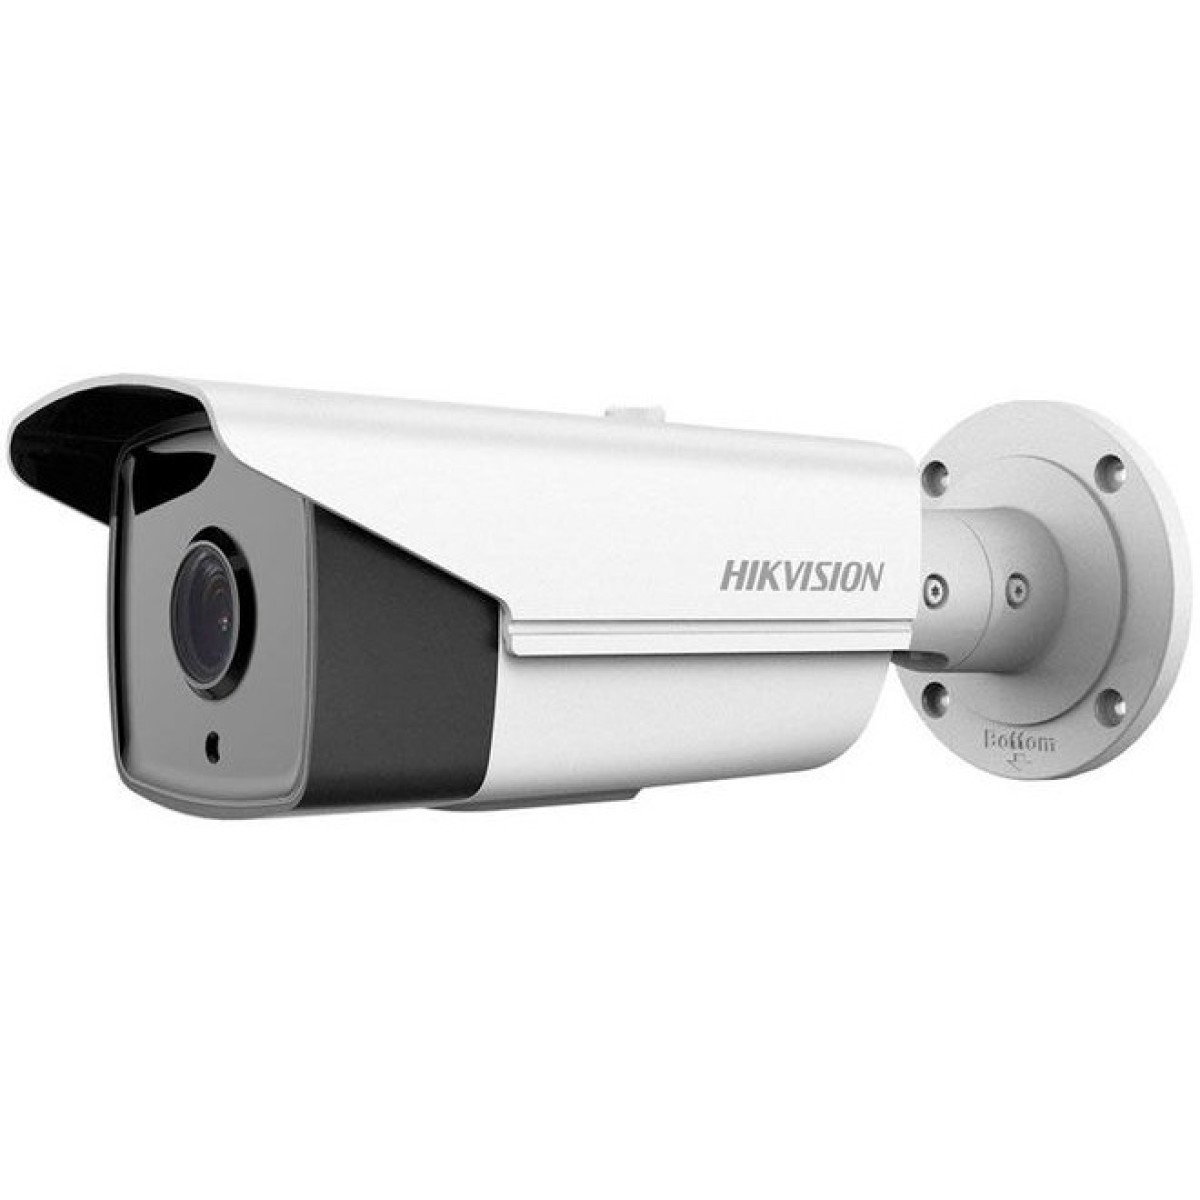 IP-камера Hikvision DS-2CD2T85FWD-I5 (4.0) 98_98.jpg